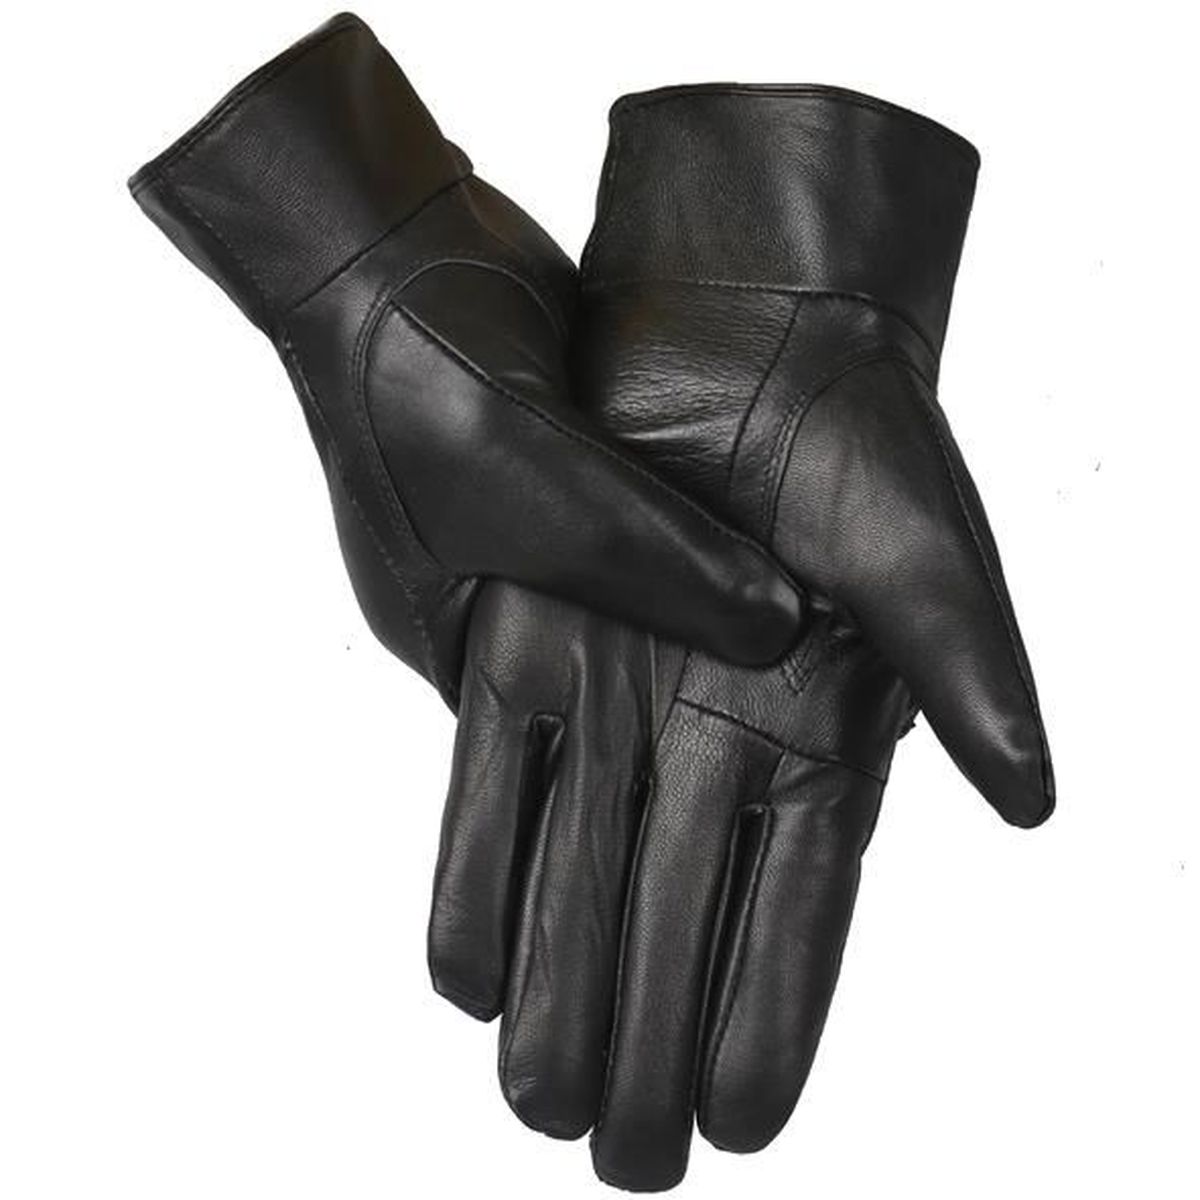 THMO - Homme Hiver Anti Froid Chaud Gants Thinsulate 3M 40g Doublés Polaire